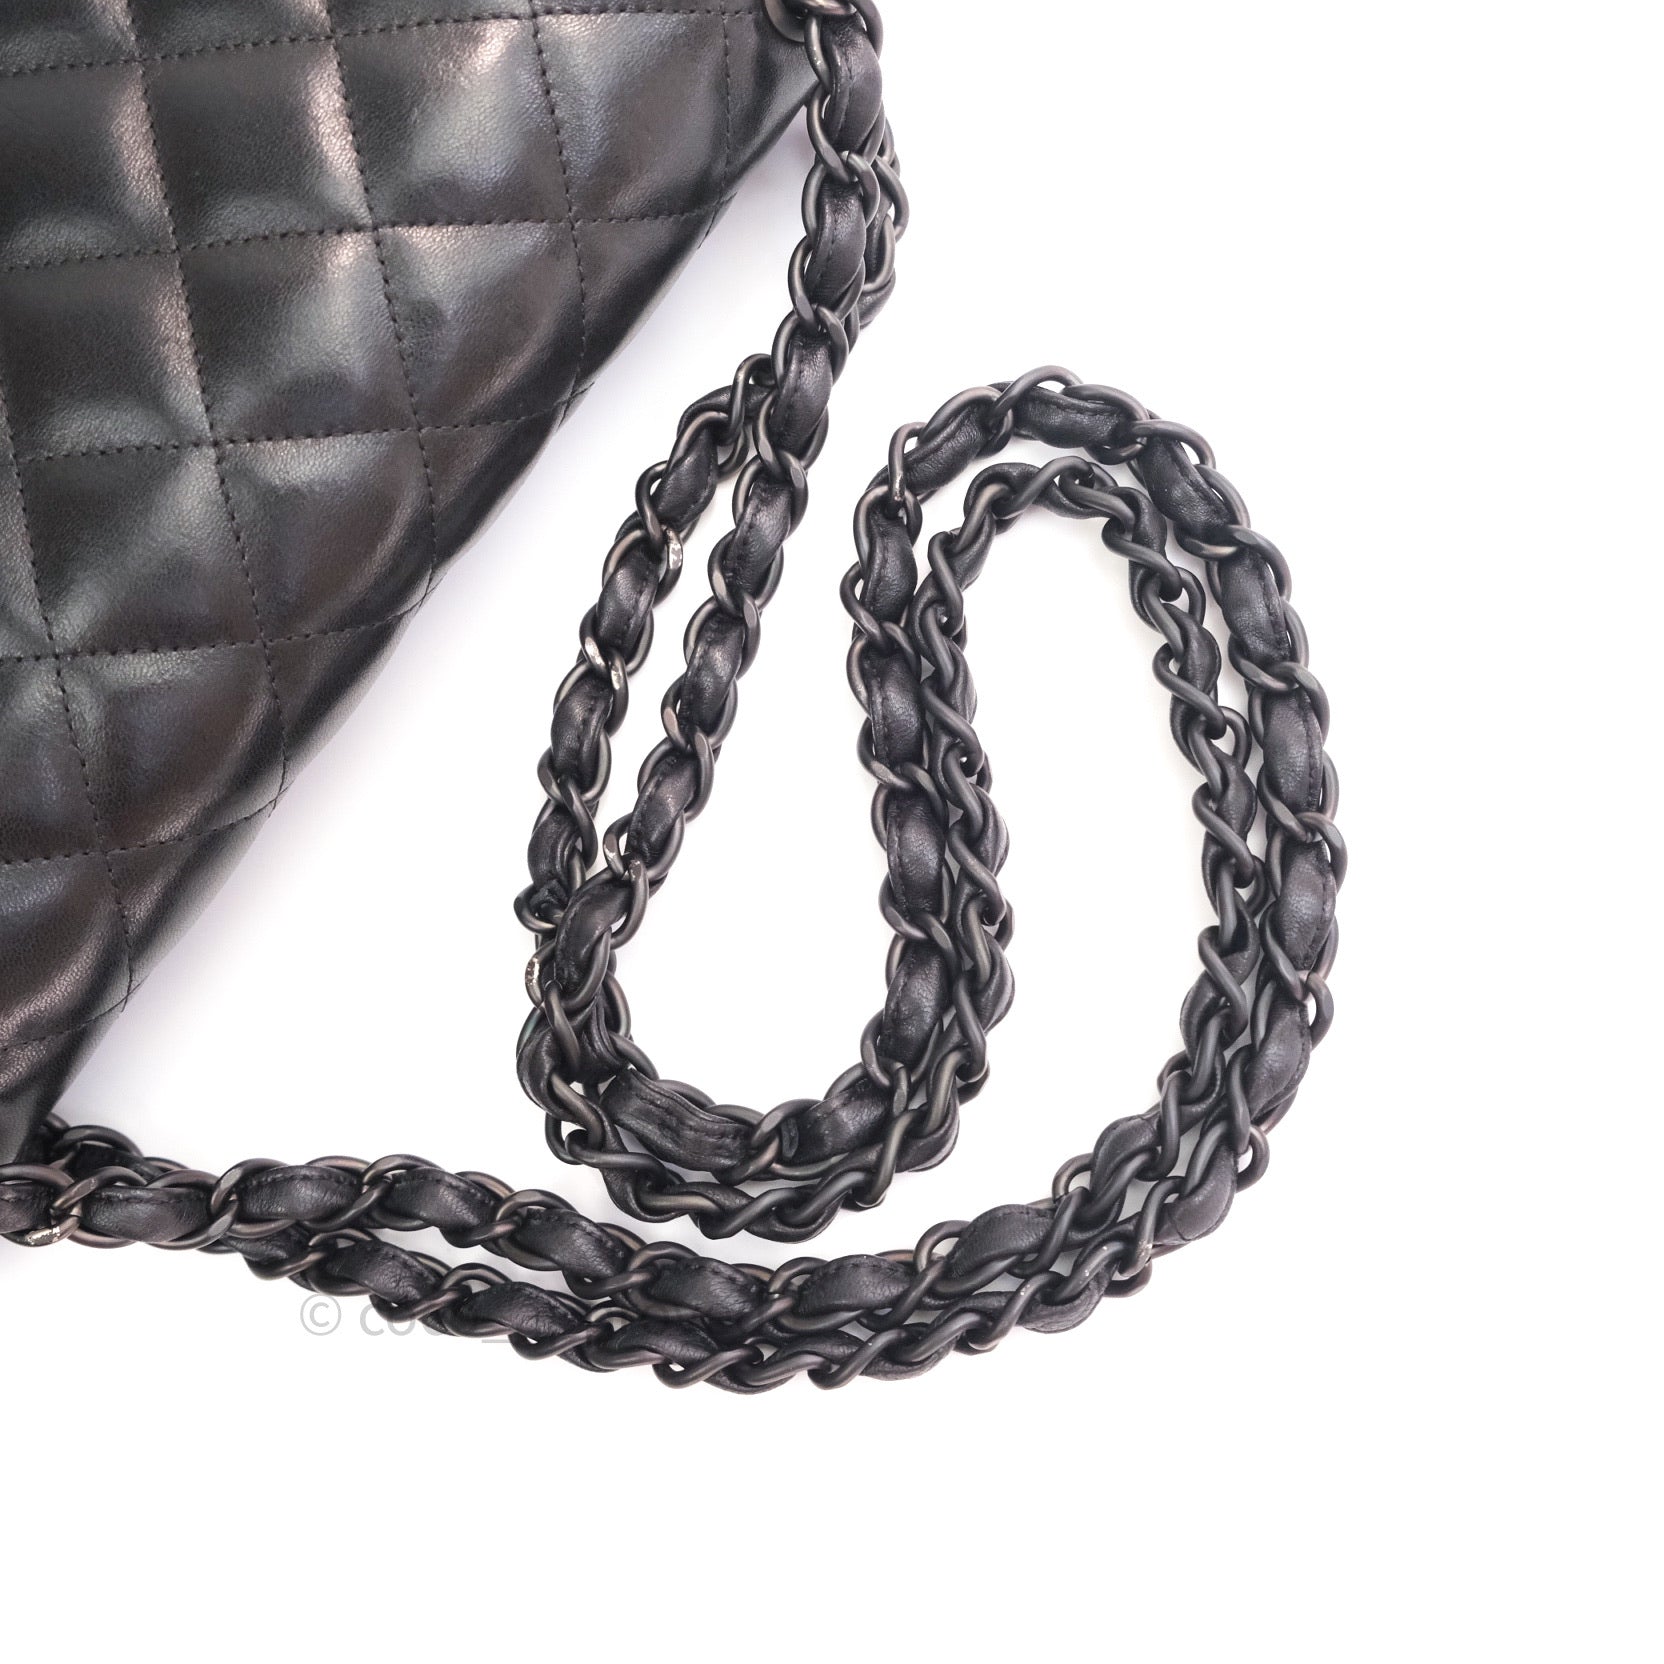 Chanel Classic Double Flap Jumbo Black Lambskin Silver Hardware.⁣ – Coco  Approved Studio